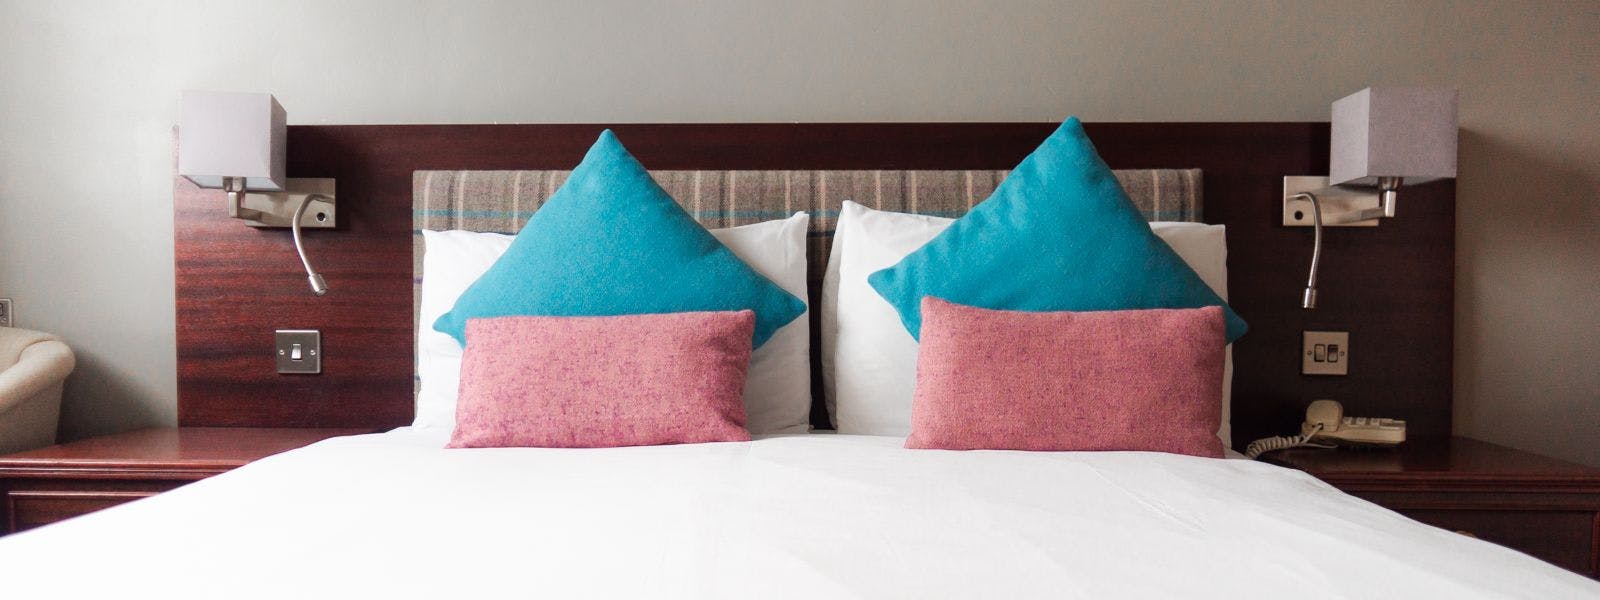 A bed with two blue pillows and a white sheet, creating a cosy atmosphere.